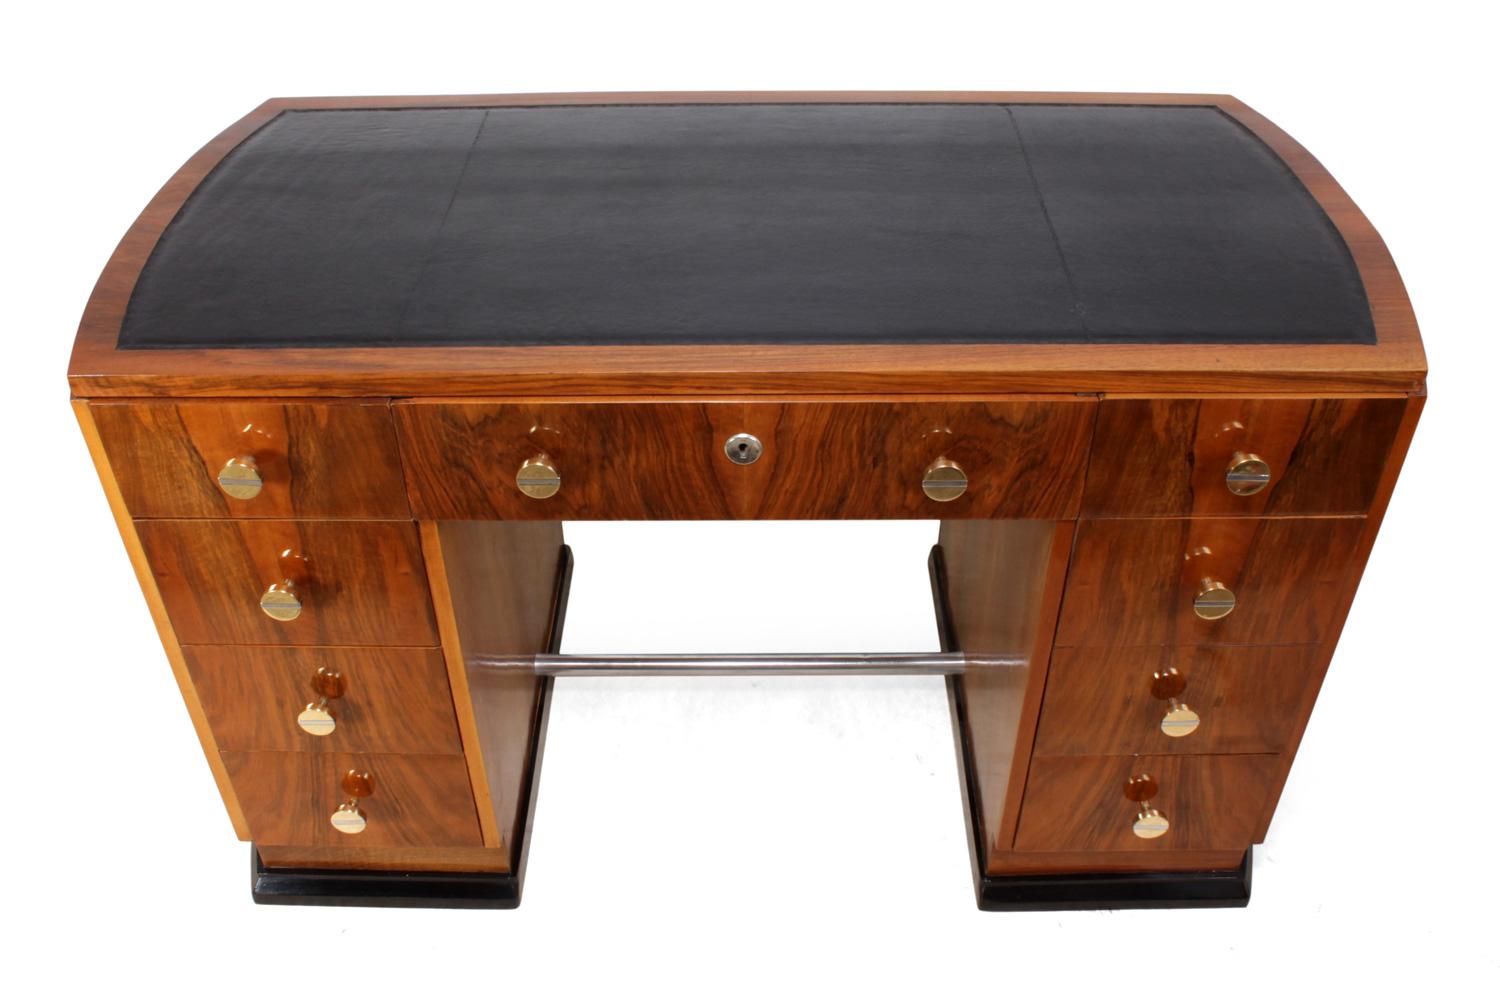 Art Deco desk in walnut, French, circa 1930.
This Art Deco desk has nine drawers, domed ends, new leather top, brass and chrome handles, the desk has been fully restored and hand polished and is in very good condition through out.

Age: